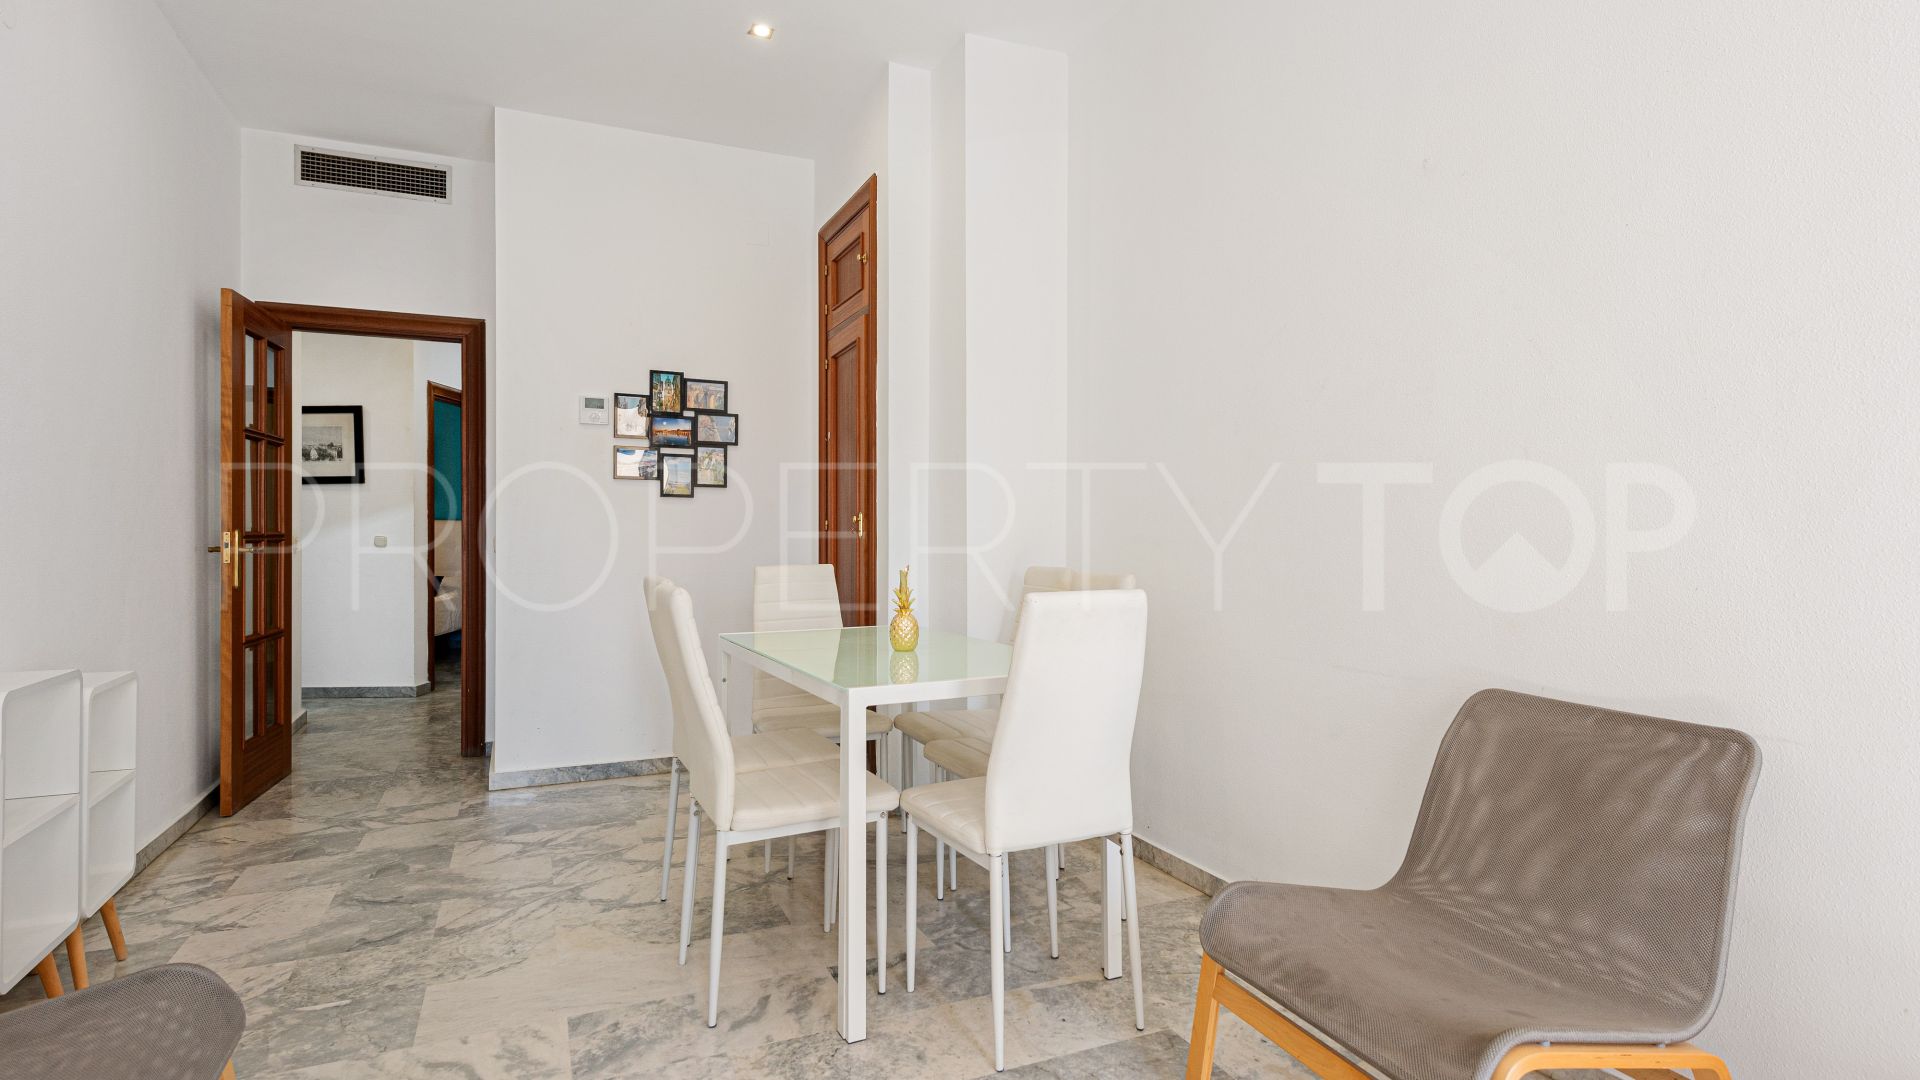 2 bedrooms apartment in Malaga for sale